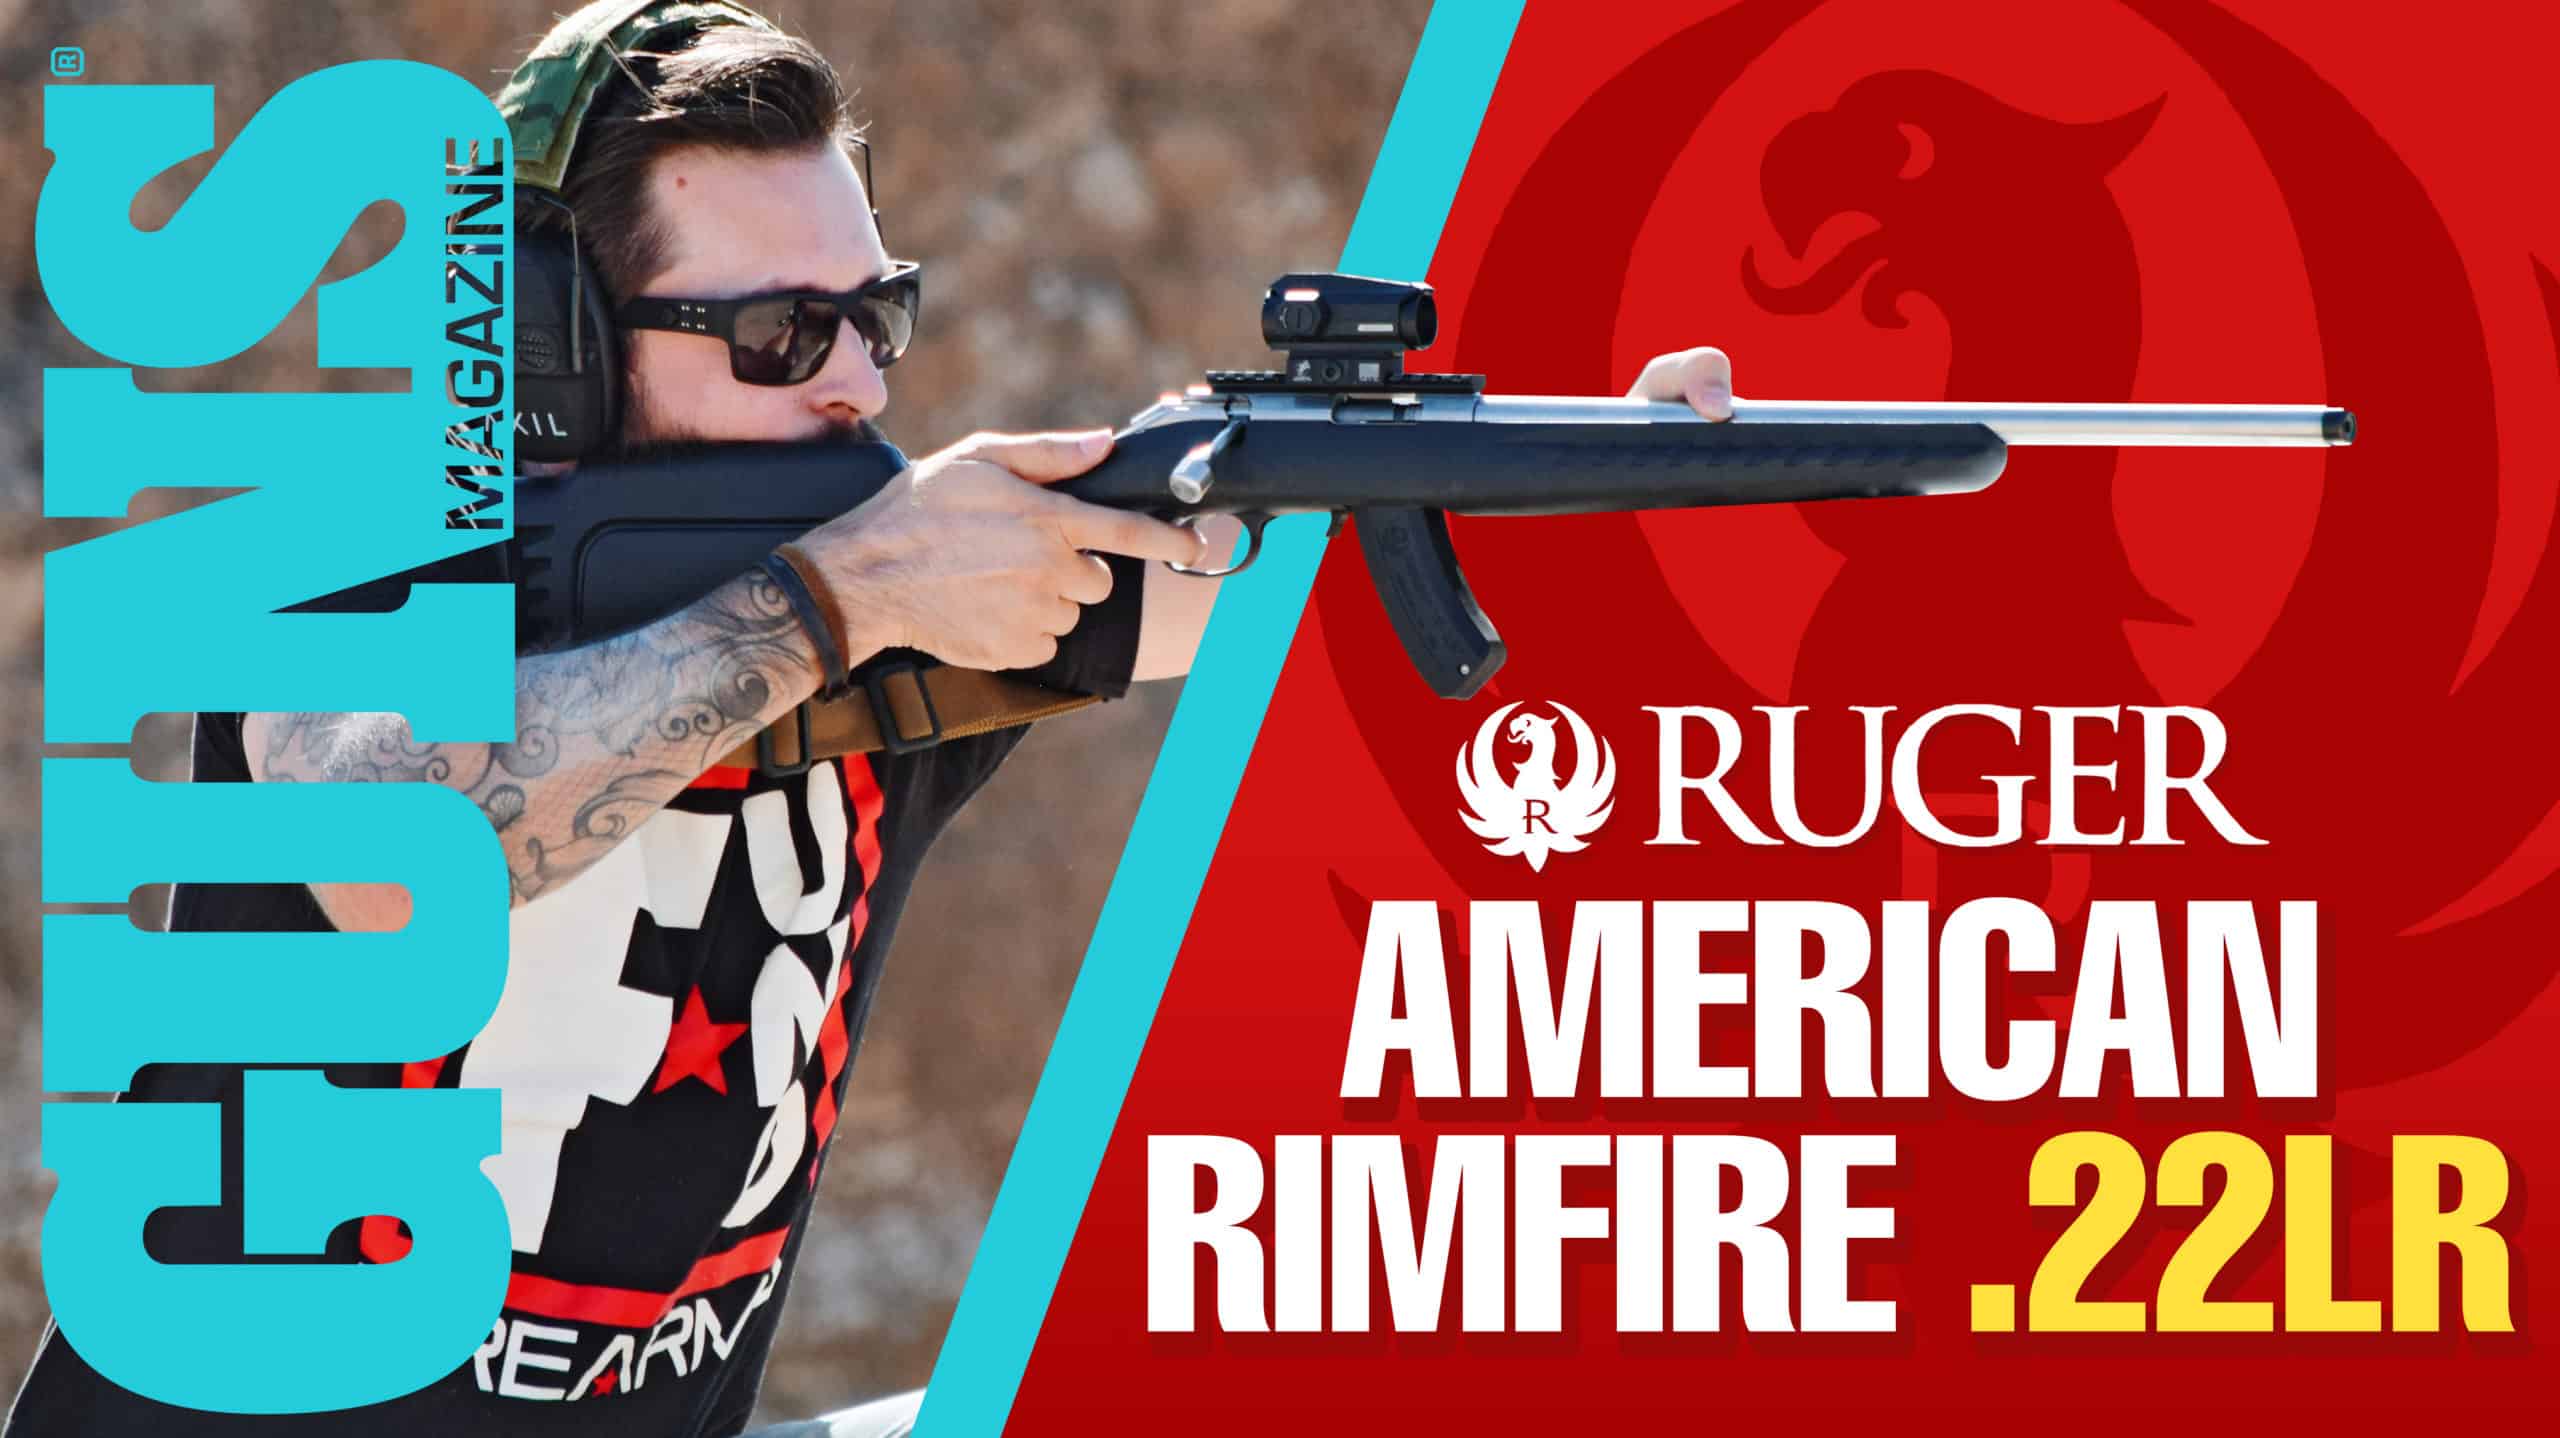 Ruger American Rimfire .22 rifle